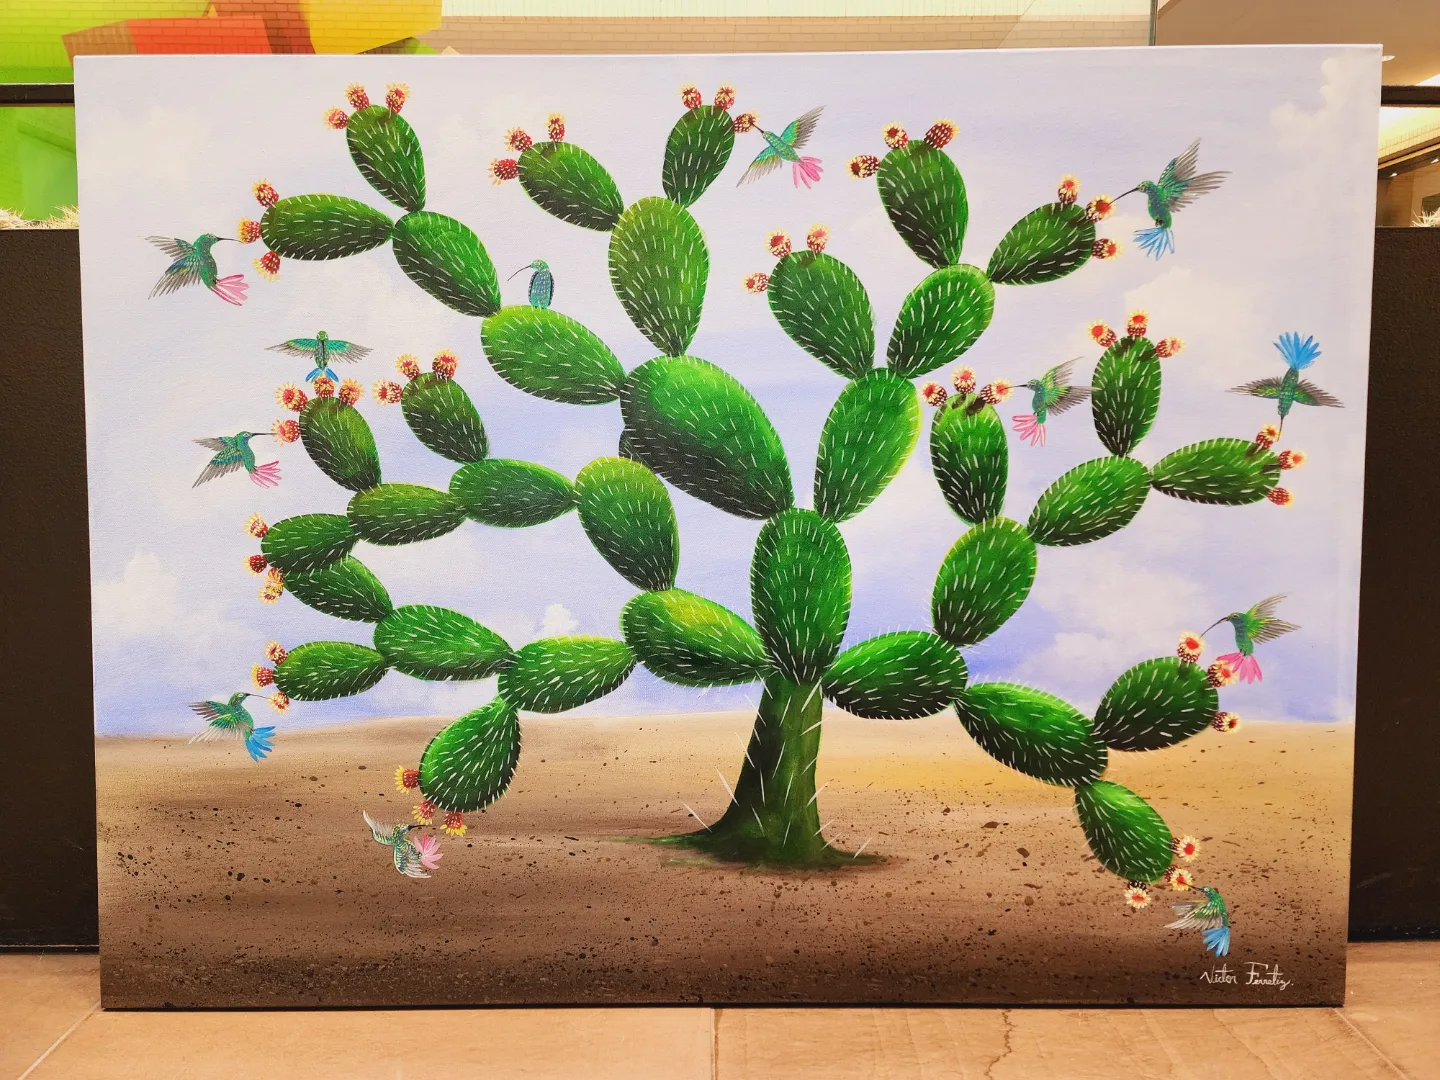 As spring is coming, it has given me great inspiration to paint these beautiful hummingbirds flying over a beautiful cactus with prickly pears.